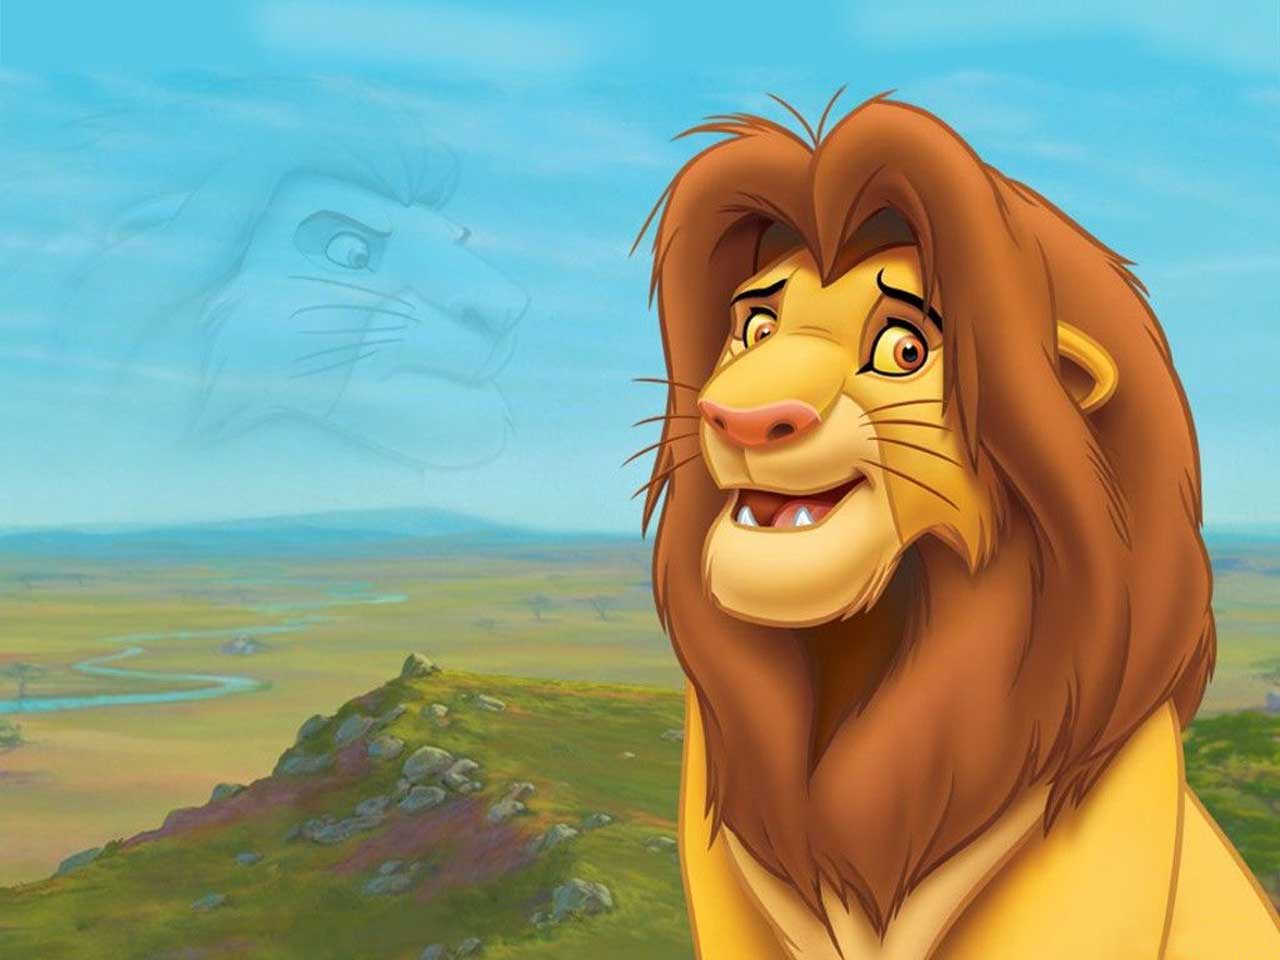 Lion King Wallpaper 11041 Hd Wallpapers in Animals   Imagescicom